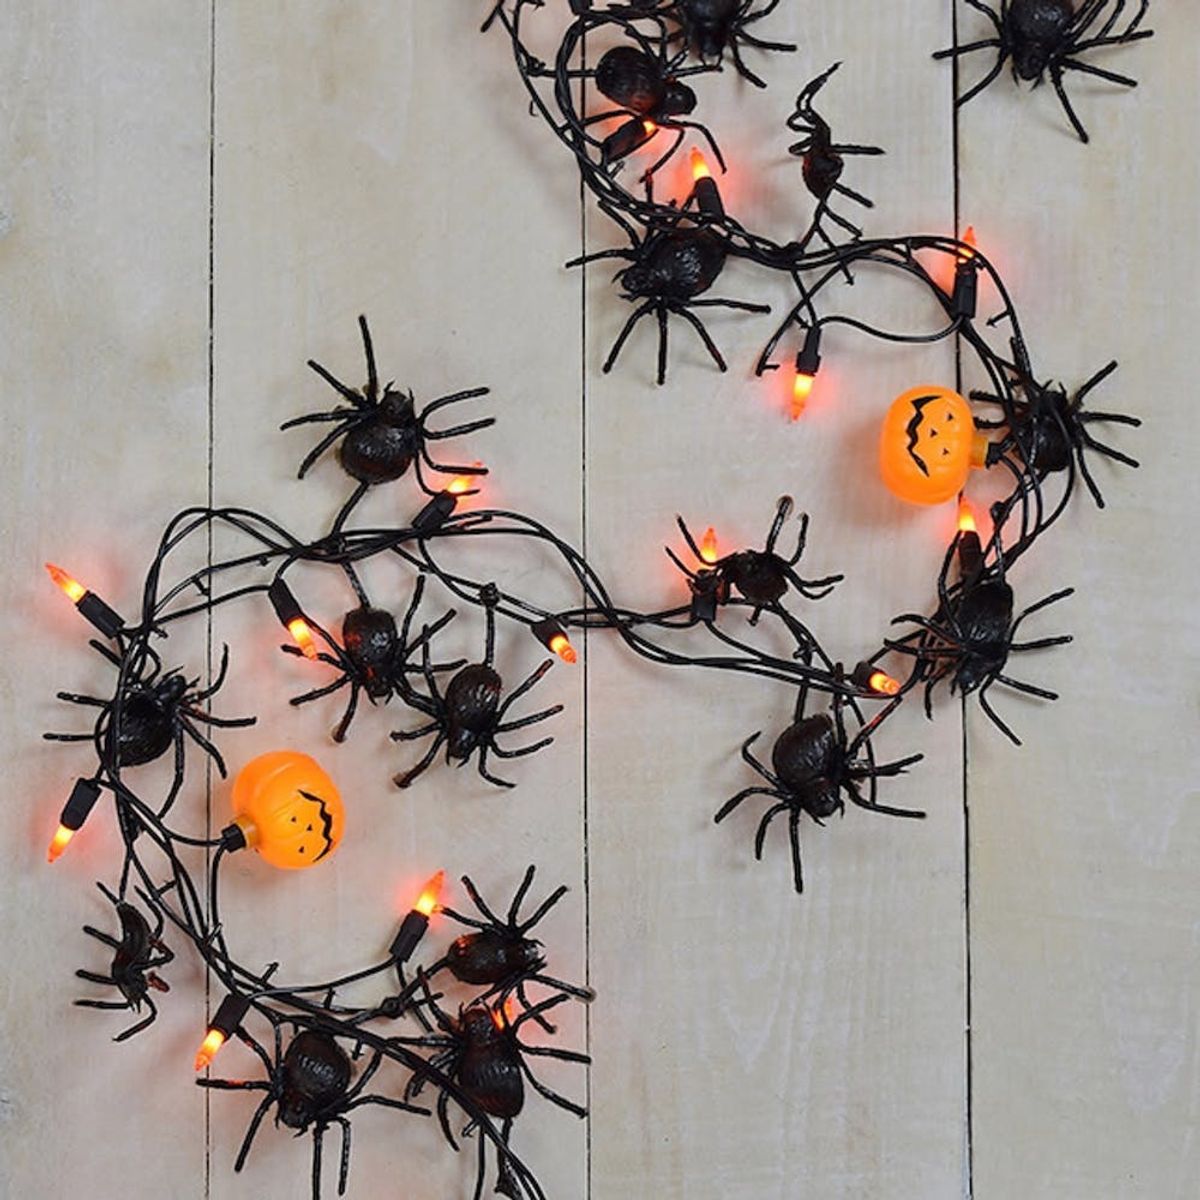 17 Halloween Lights You Need for Your Porch